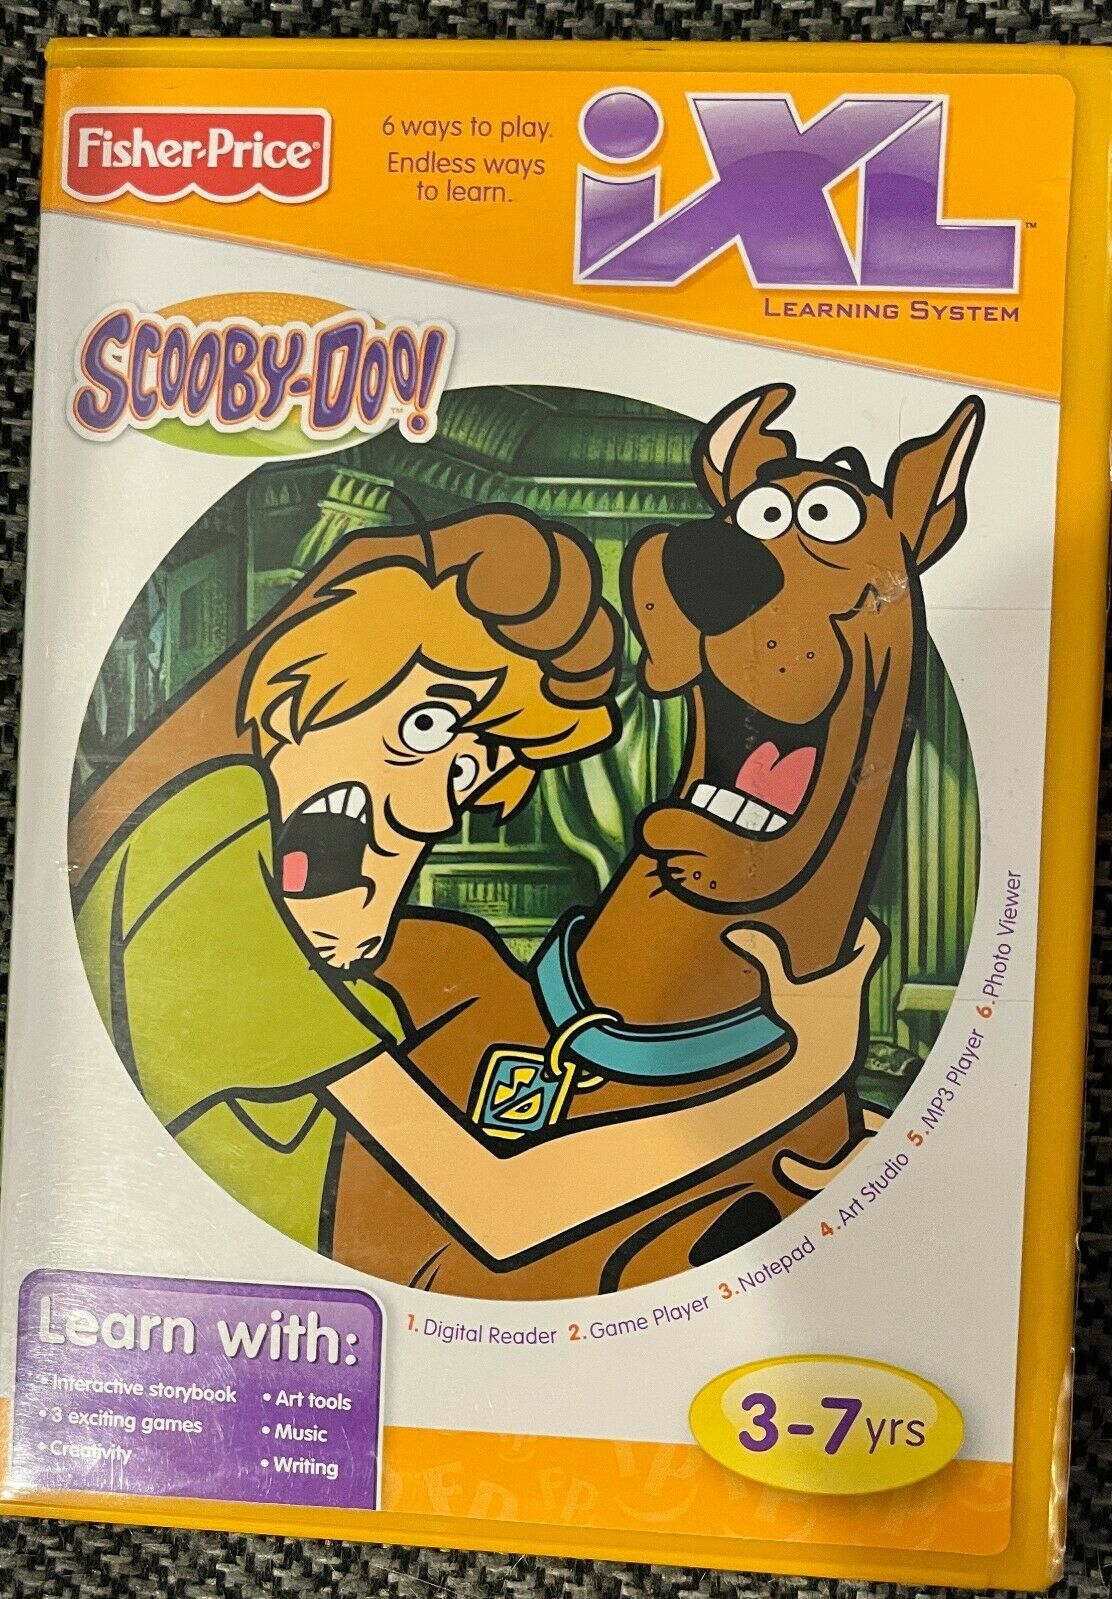 Primary image for Scooby-Doo! iXL Fisher Price Learning System Game Multi Subject Ages 3-7 CD-ROM